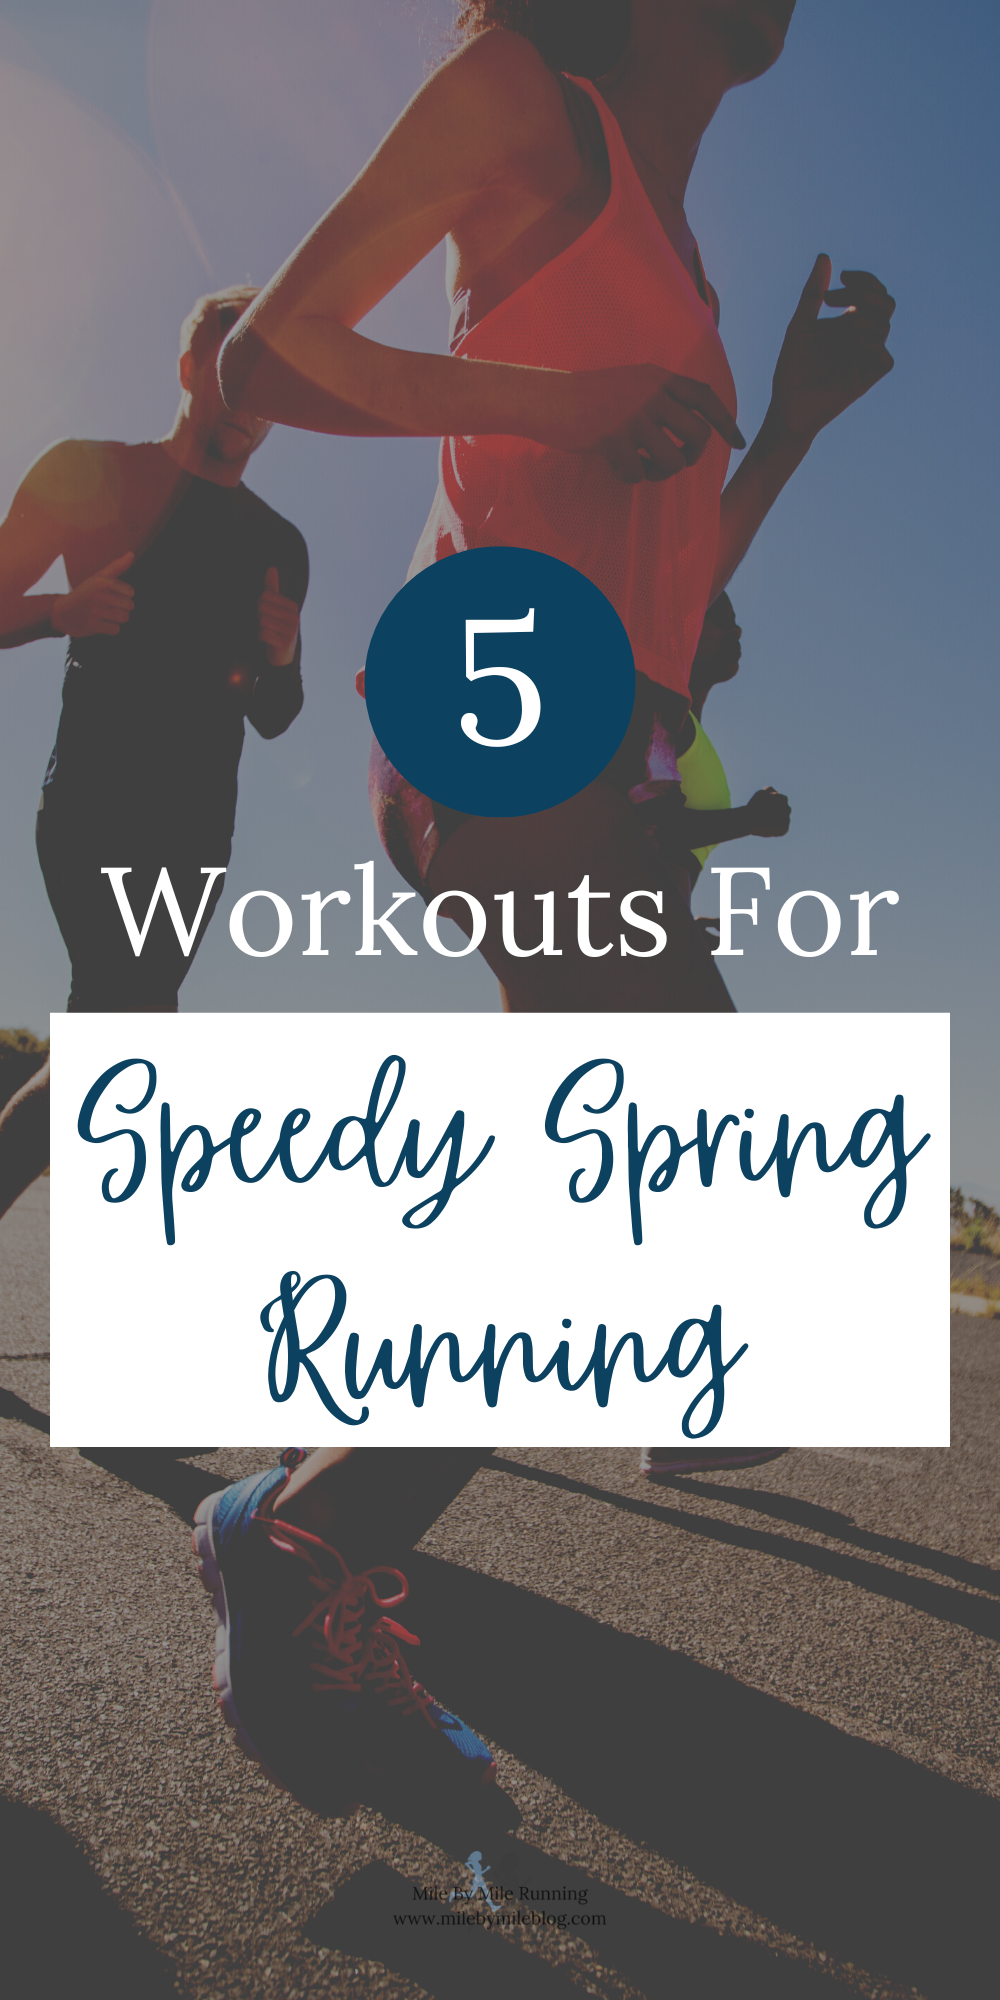 Looking to pick up the pace this spring? Try these workouts that will help you build strength and speed to prepare for a successful season of racing this spring and summer.